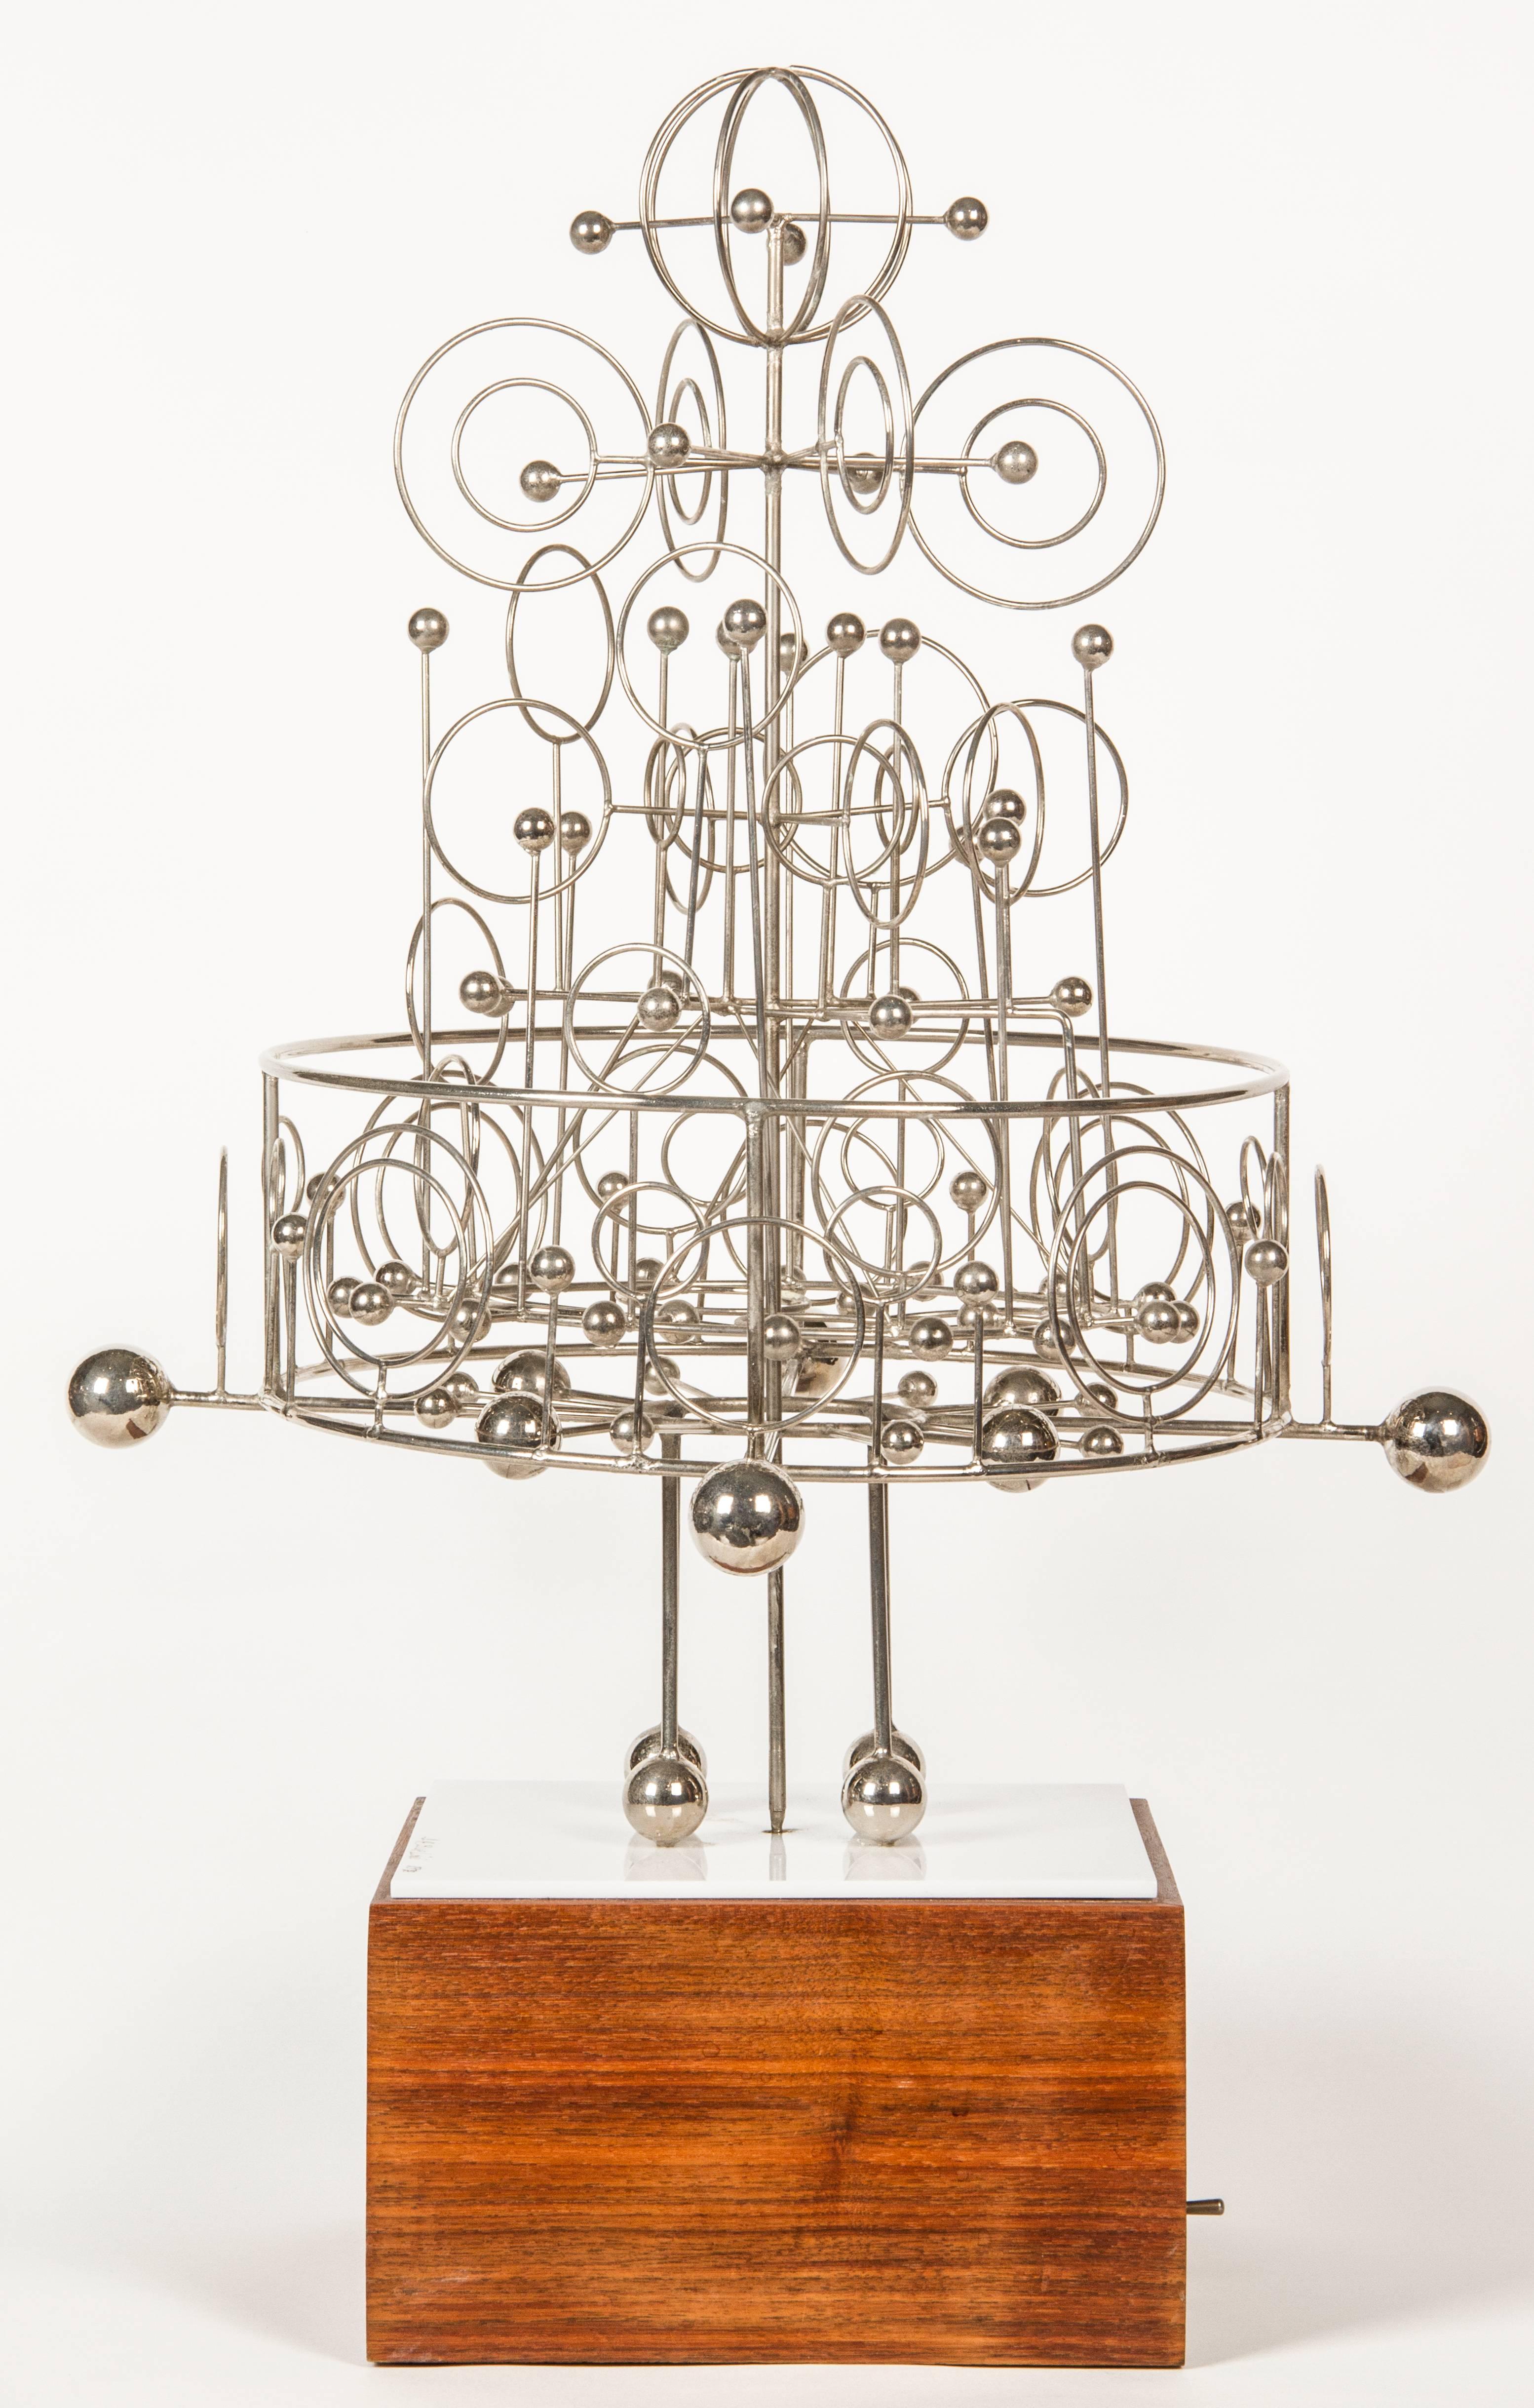 This is a wonderfully designed kinetic sctulpture by Chicago's Joseph Burlini. The sculpture is battery powered.